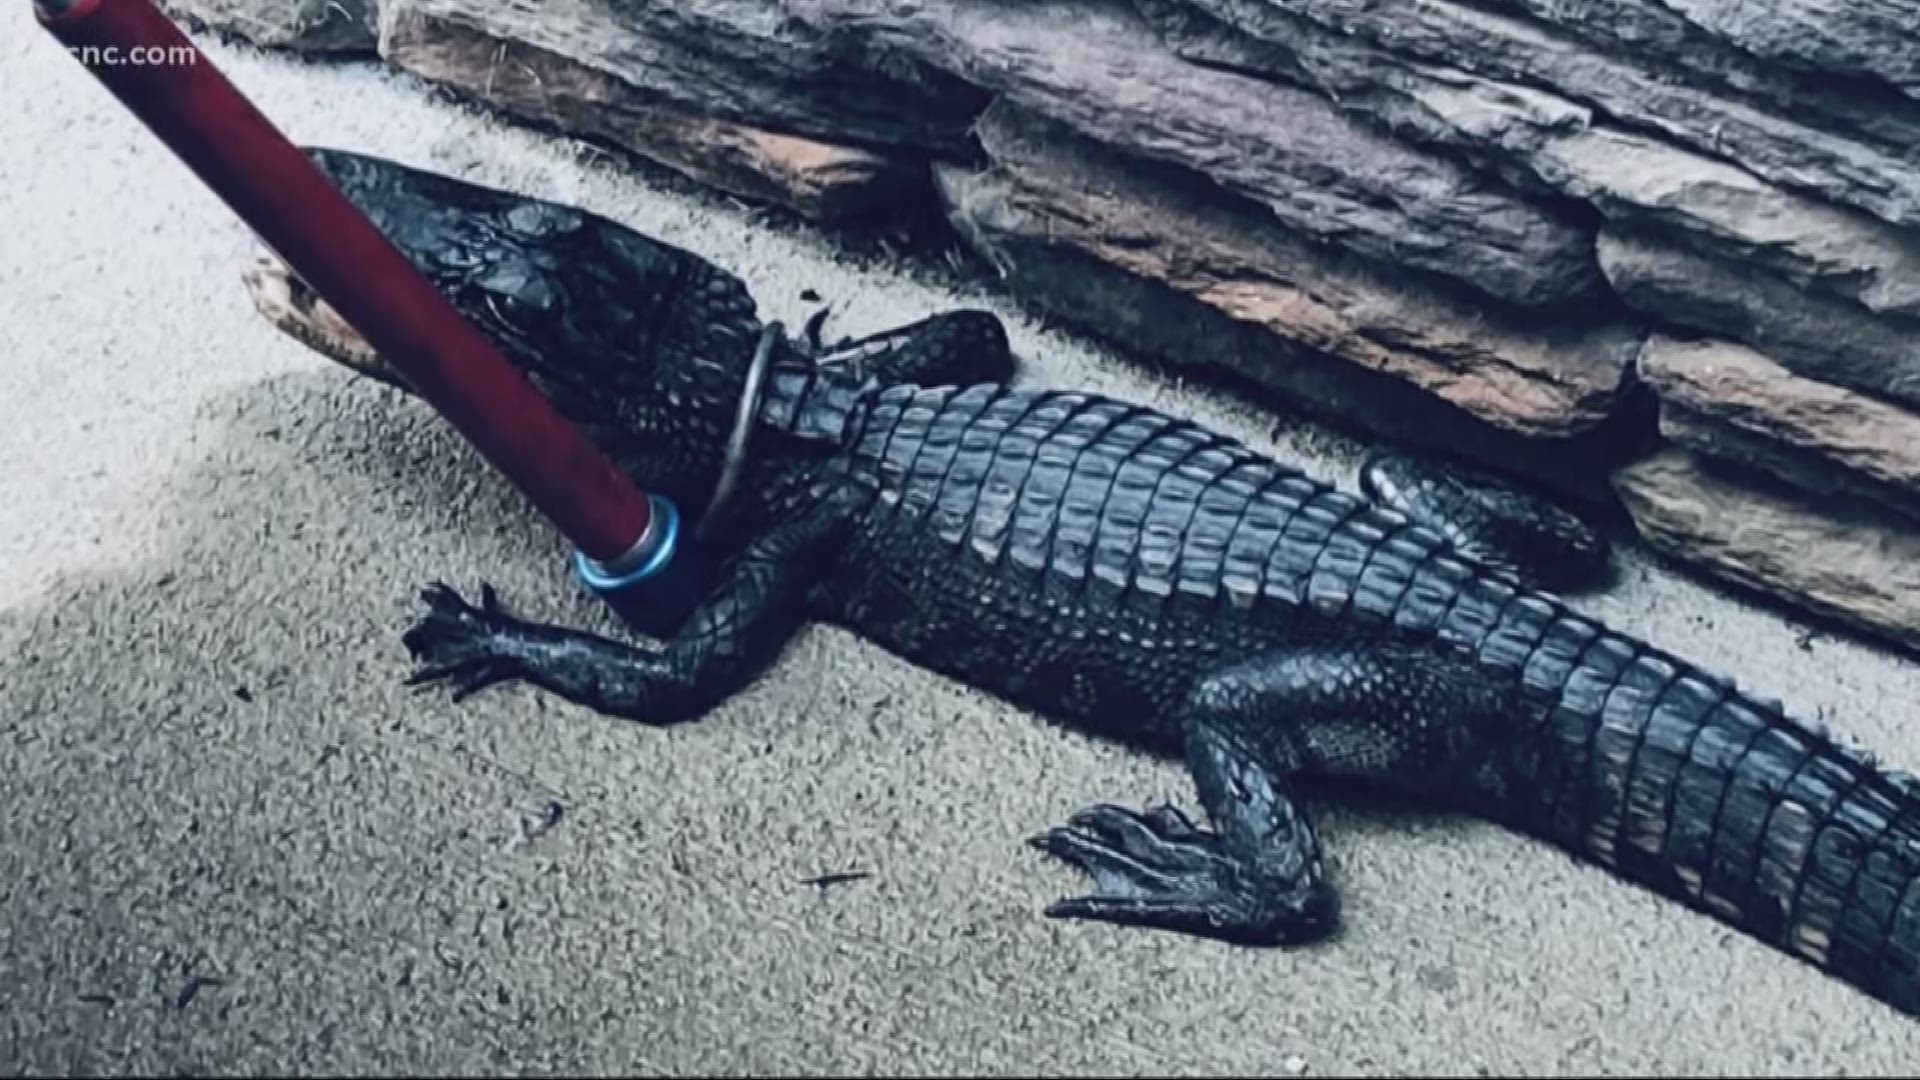 Sheriff's deputies and animal control were called to the Vintage Creek subdivision Sunday, and found a small alligator in a family's driveway.